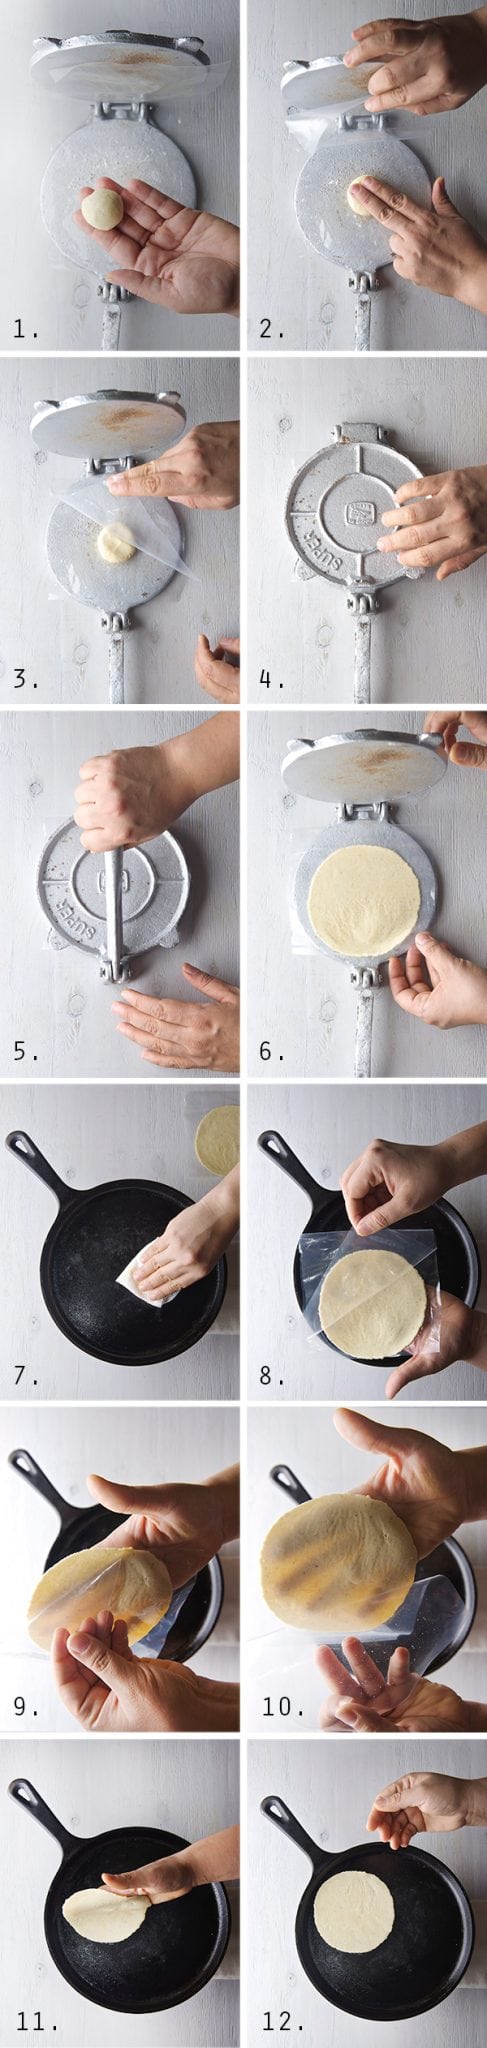 Making-Handmade-Corn-tortillas-easy-Step-by-step_Yes,-more-please!